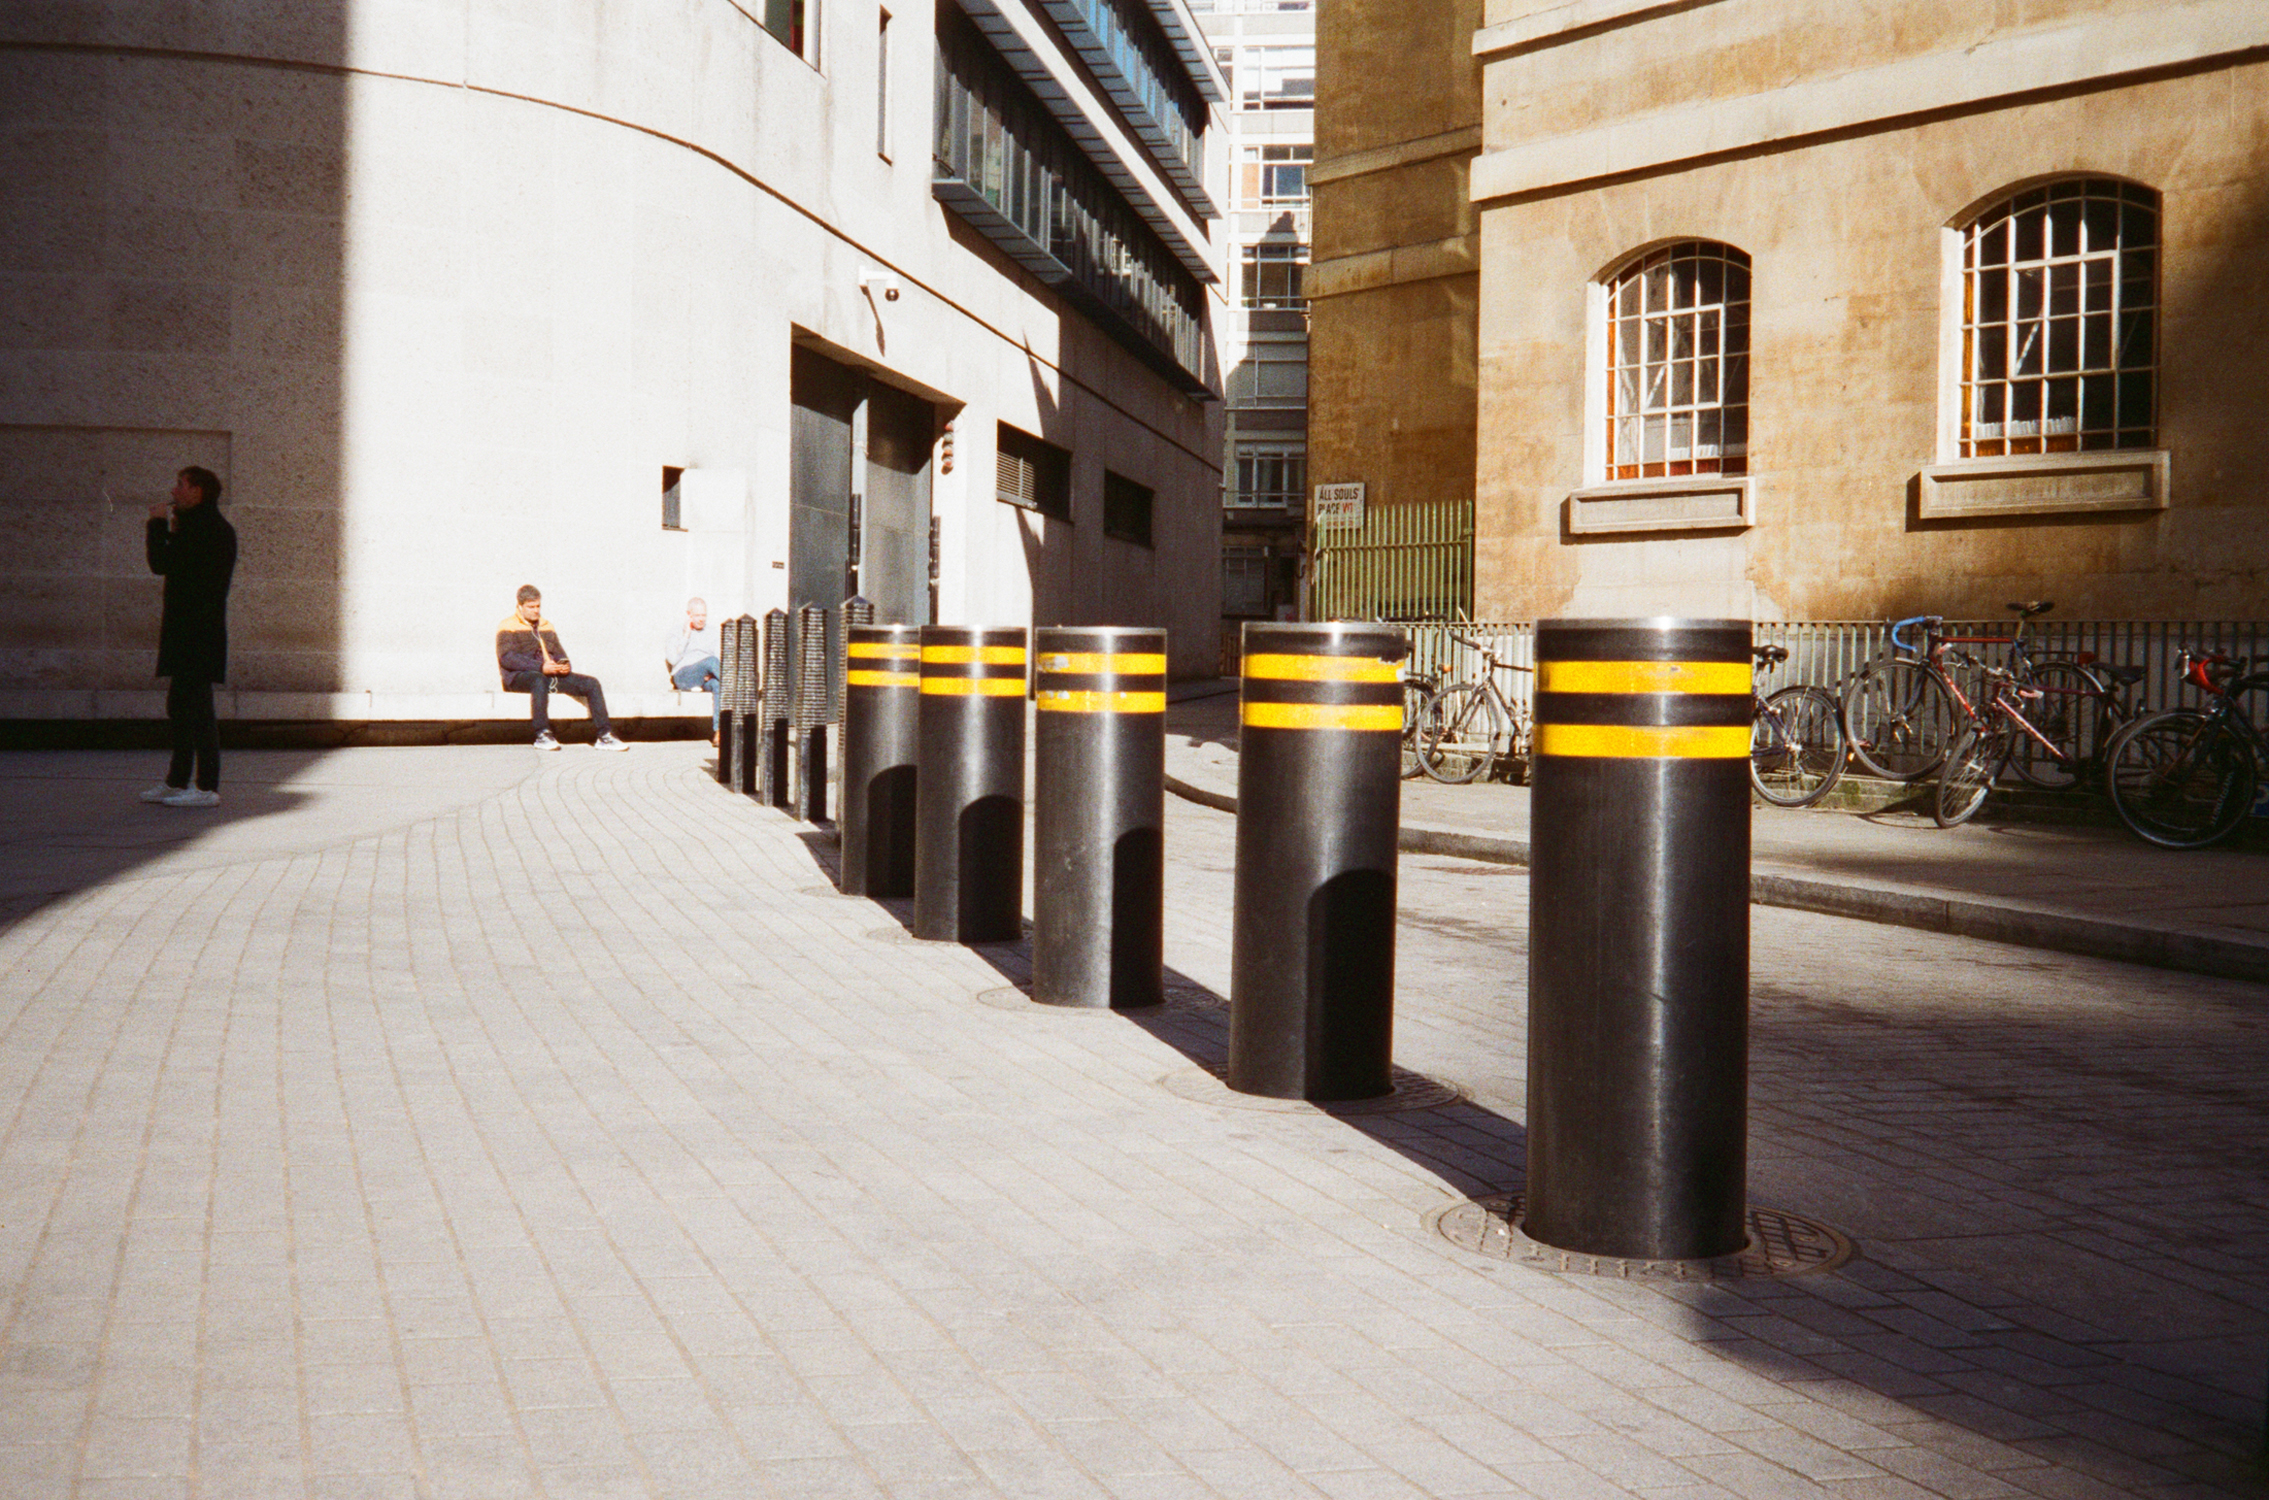 Smokers and bollards (Pic: Stephen Dowling)